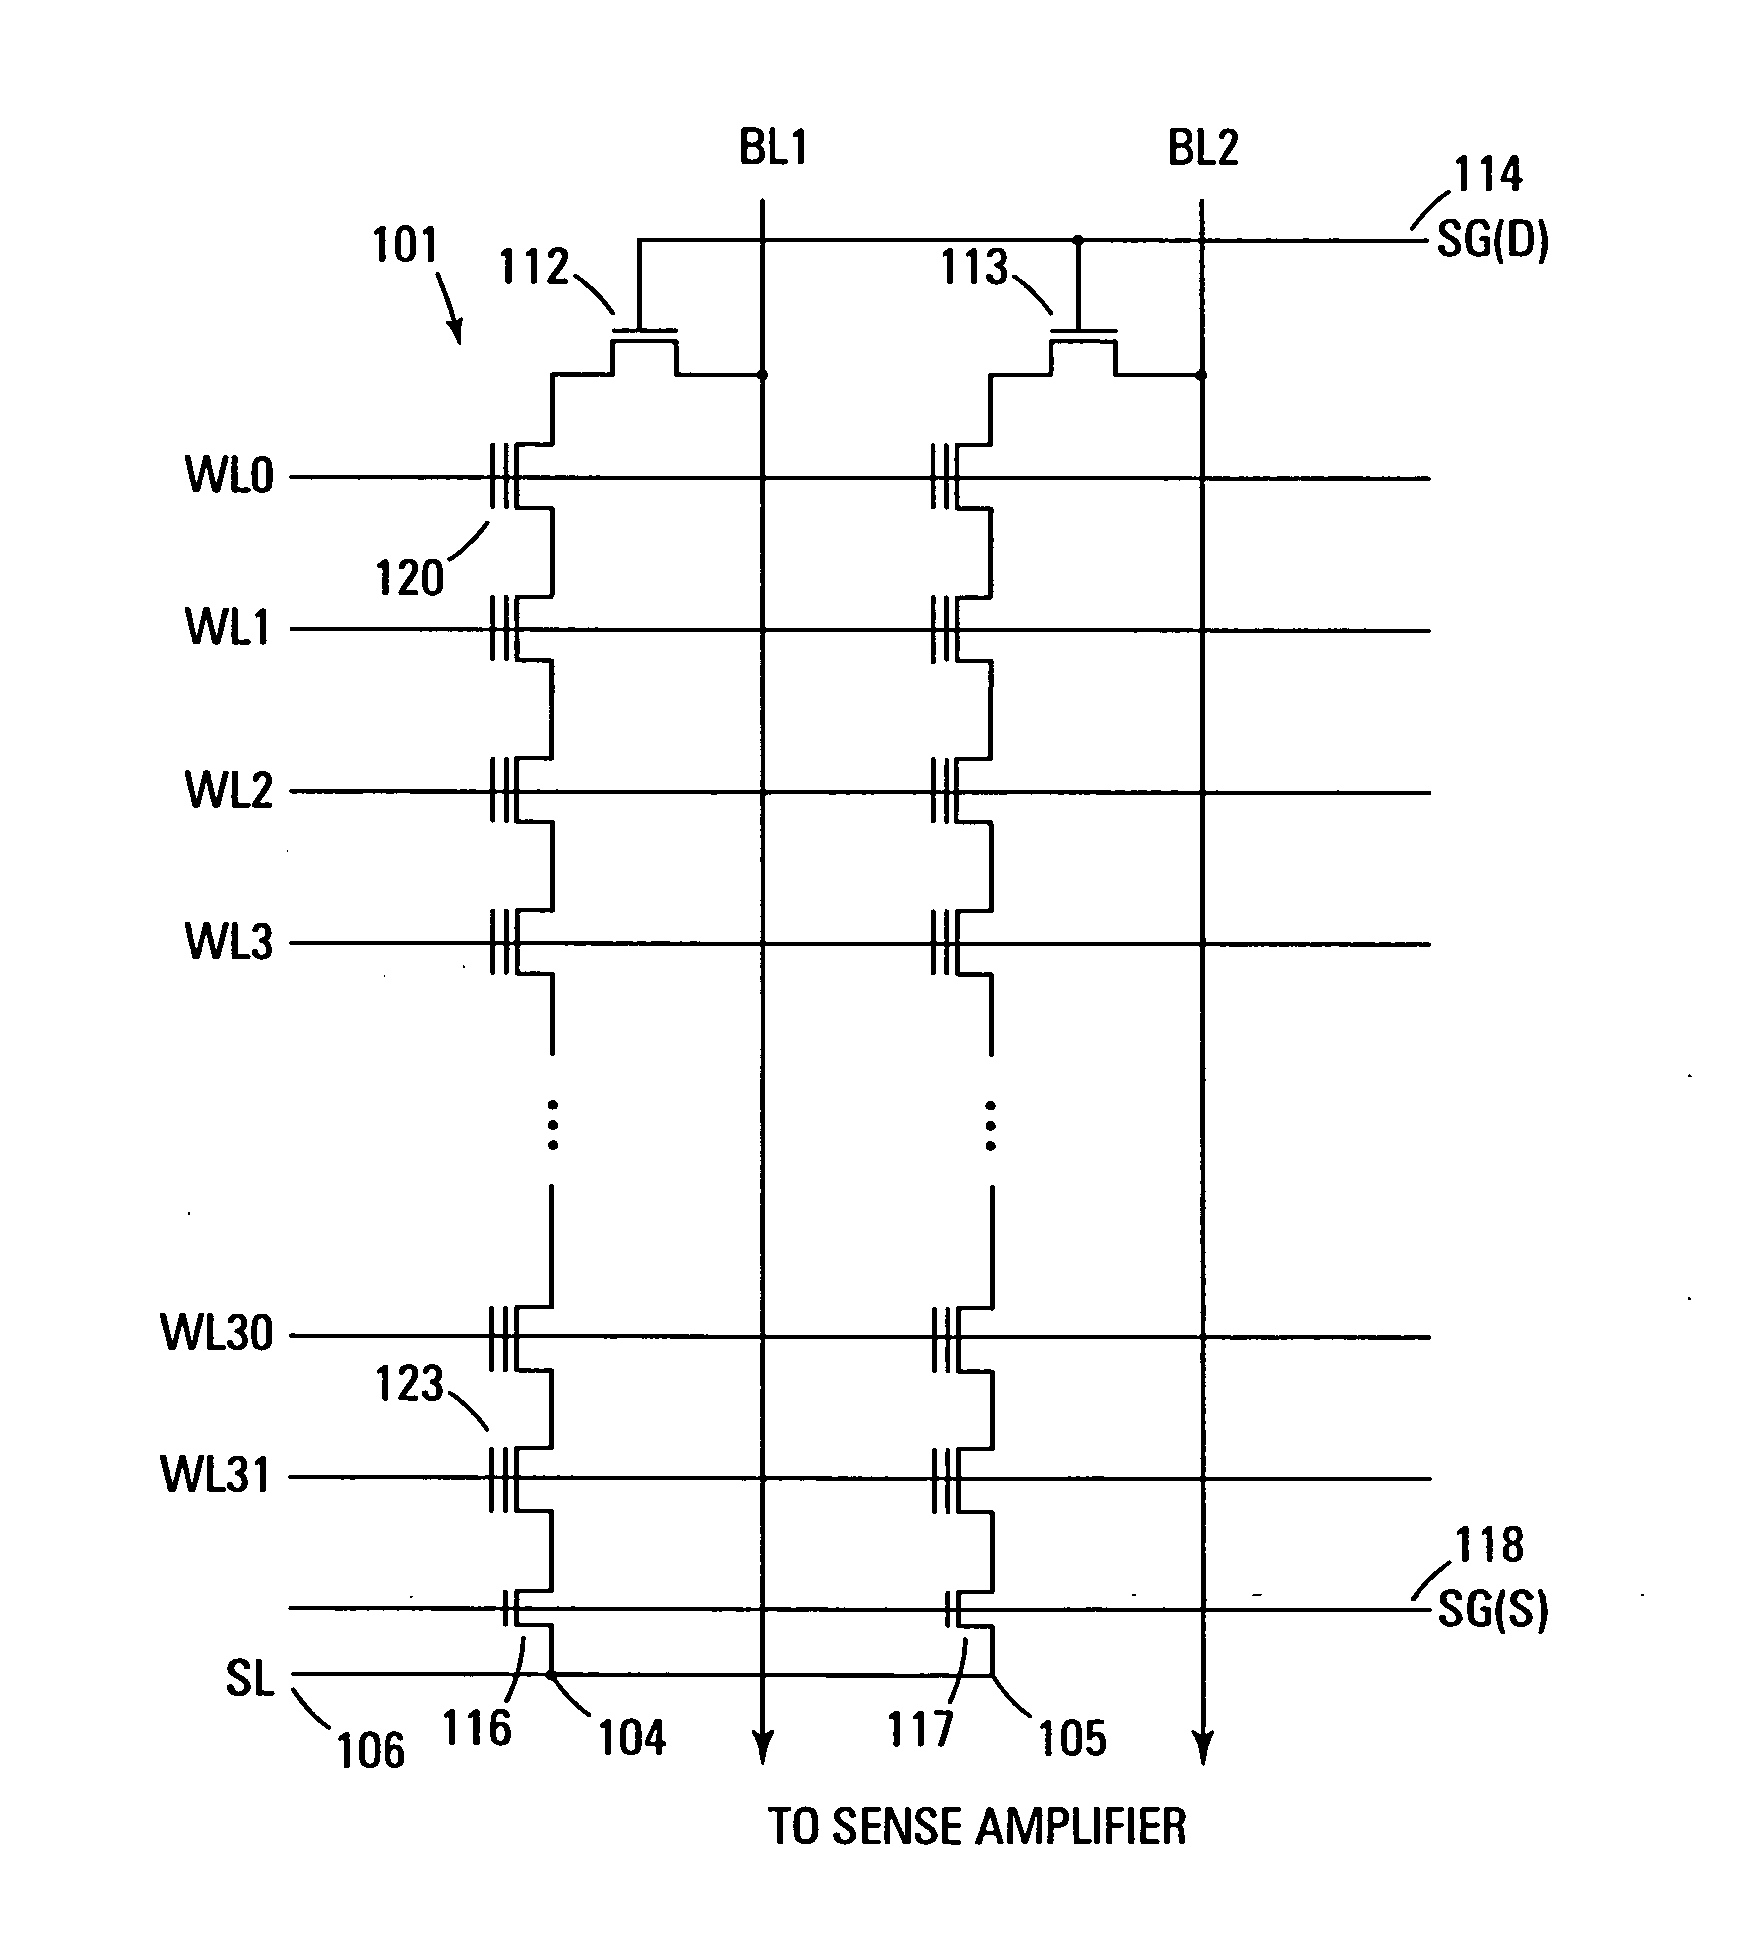 Multiple level cell memory device with single bit per cell, re-mappable memory block